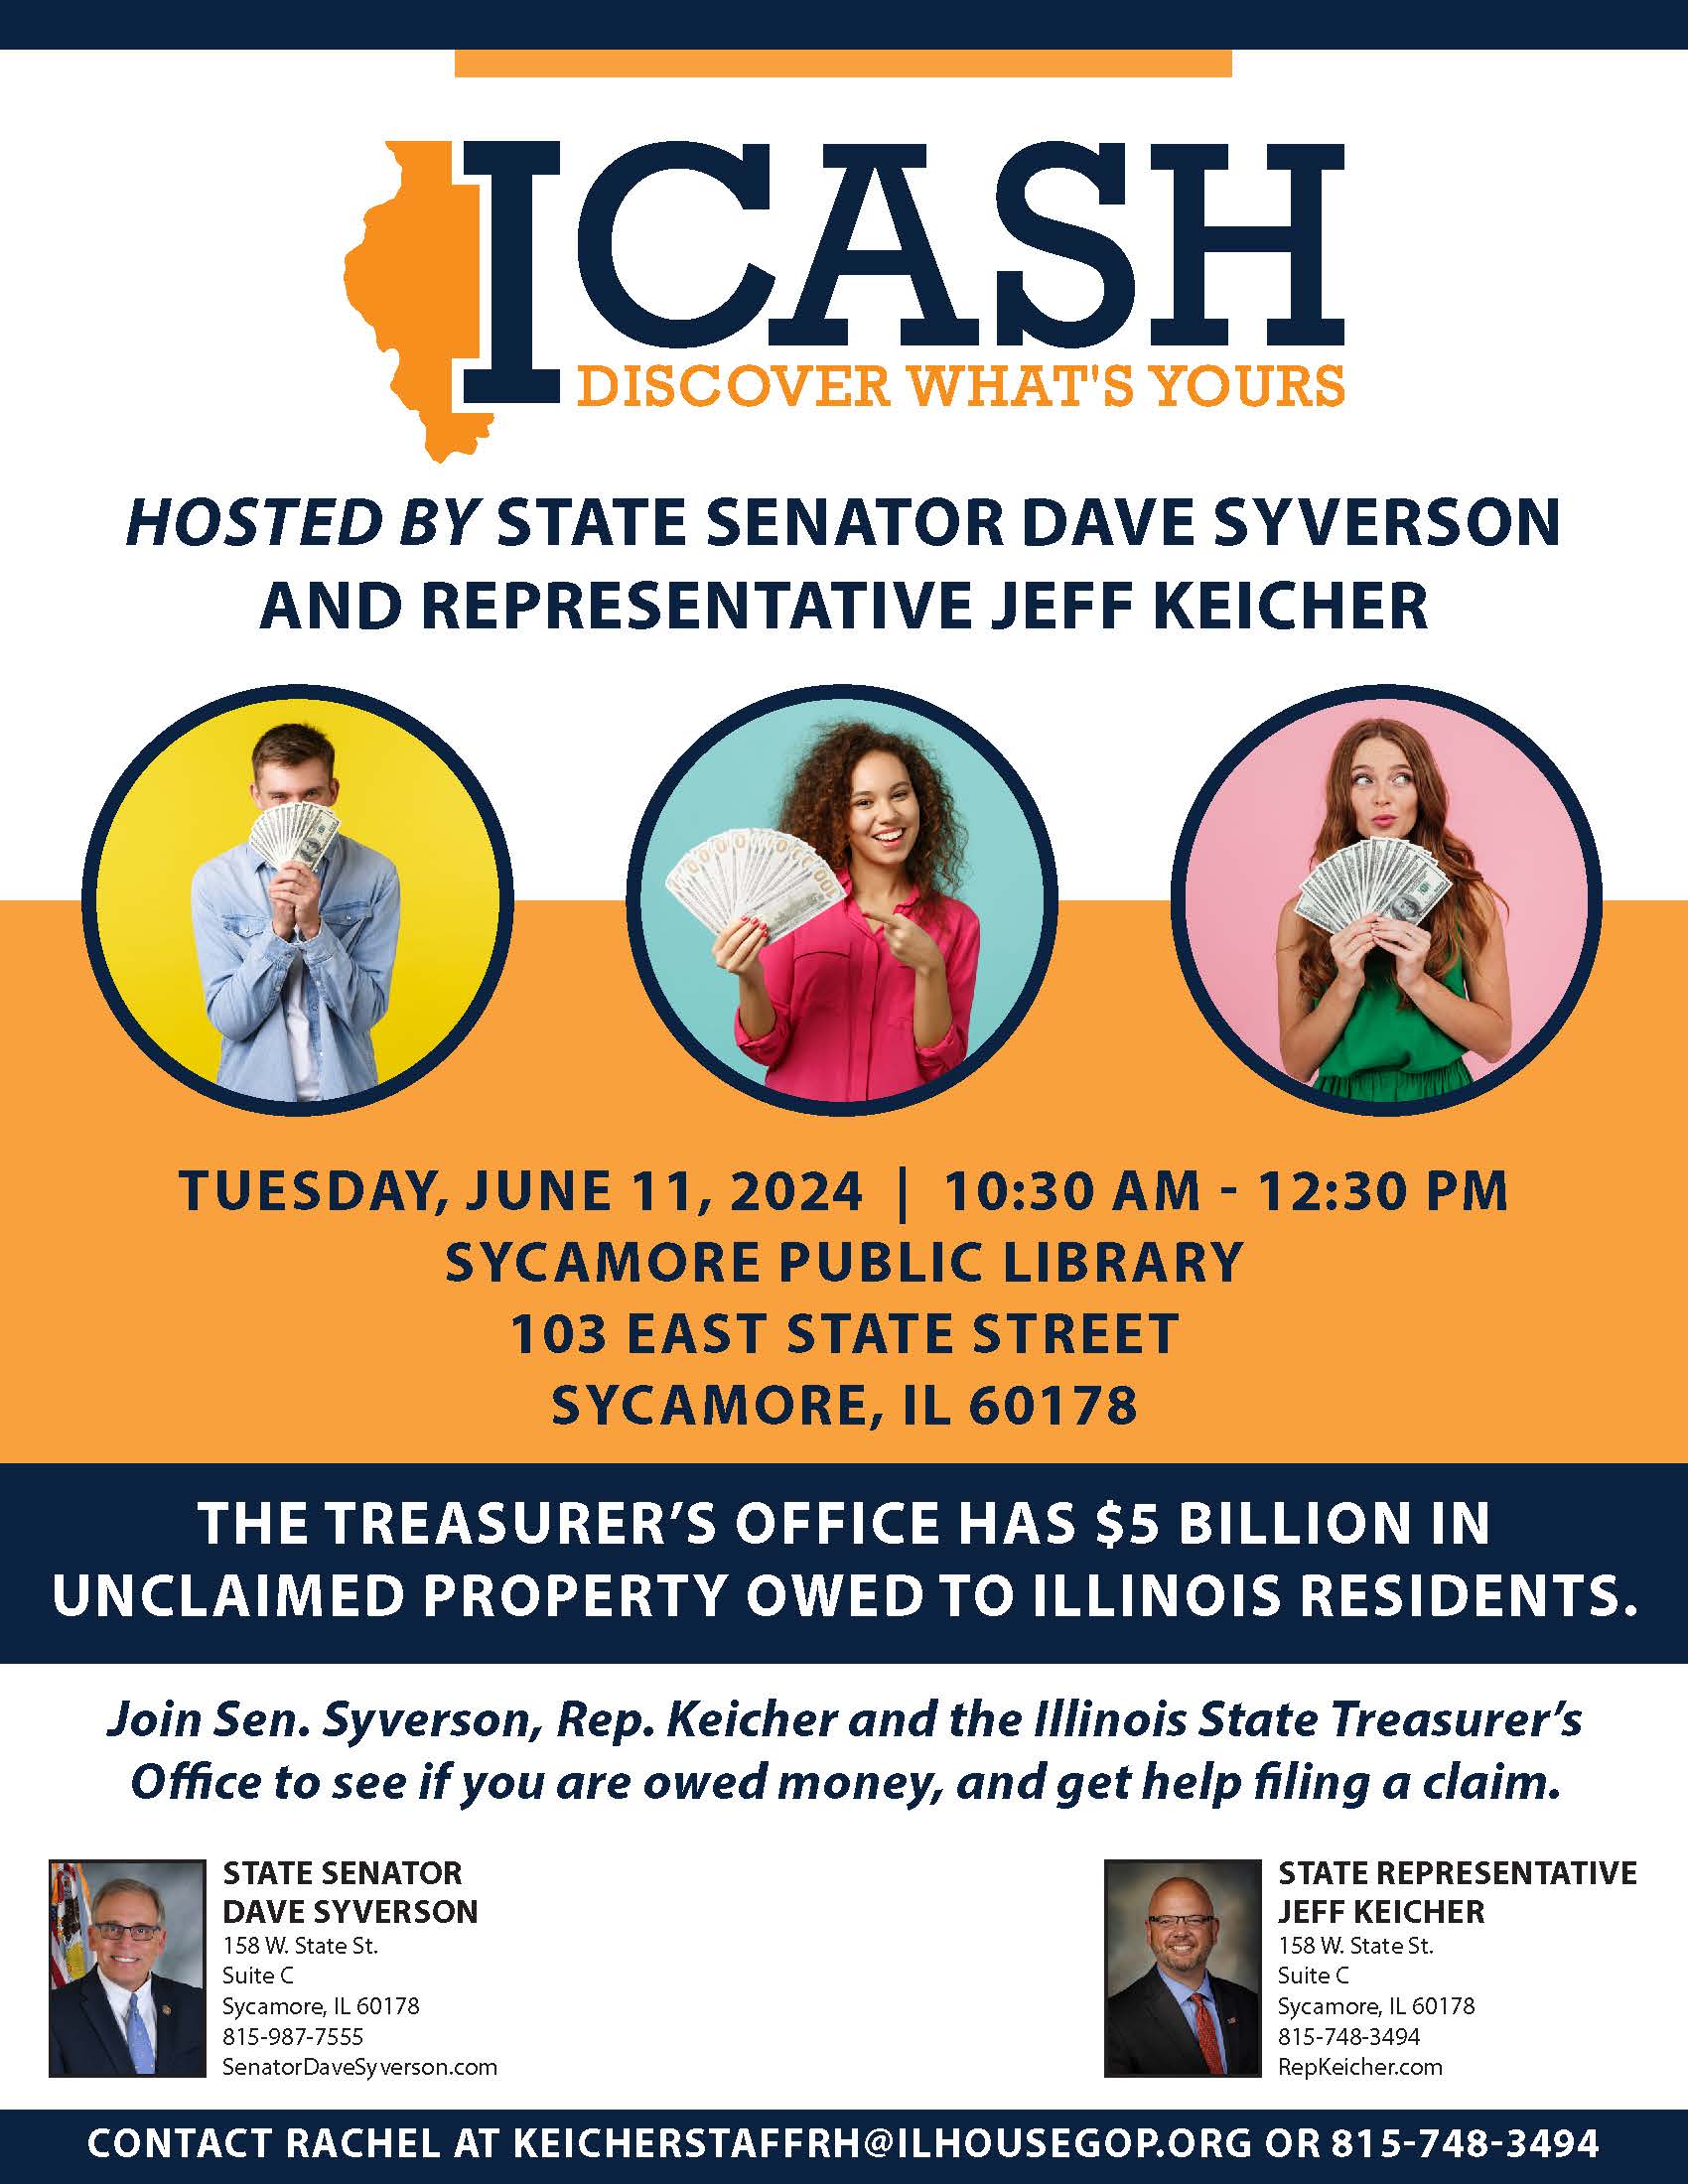 I CASH! Discover What’s Yours June 11 in Sycamore.